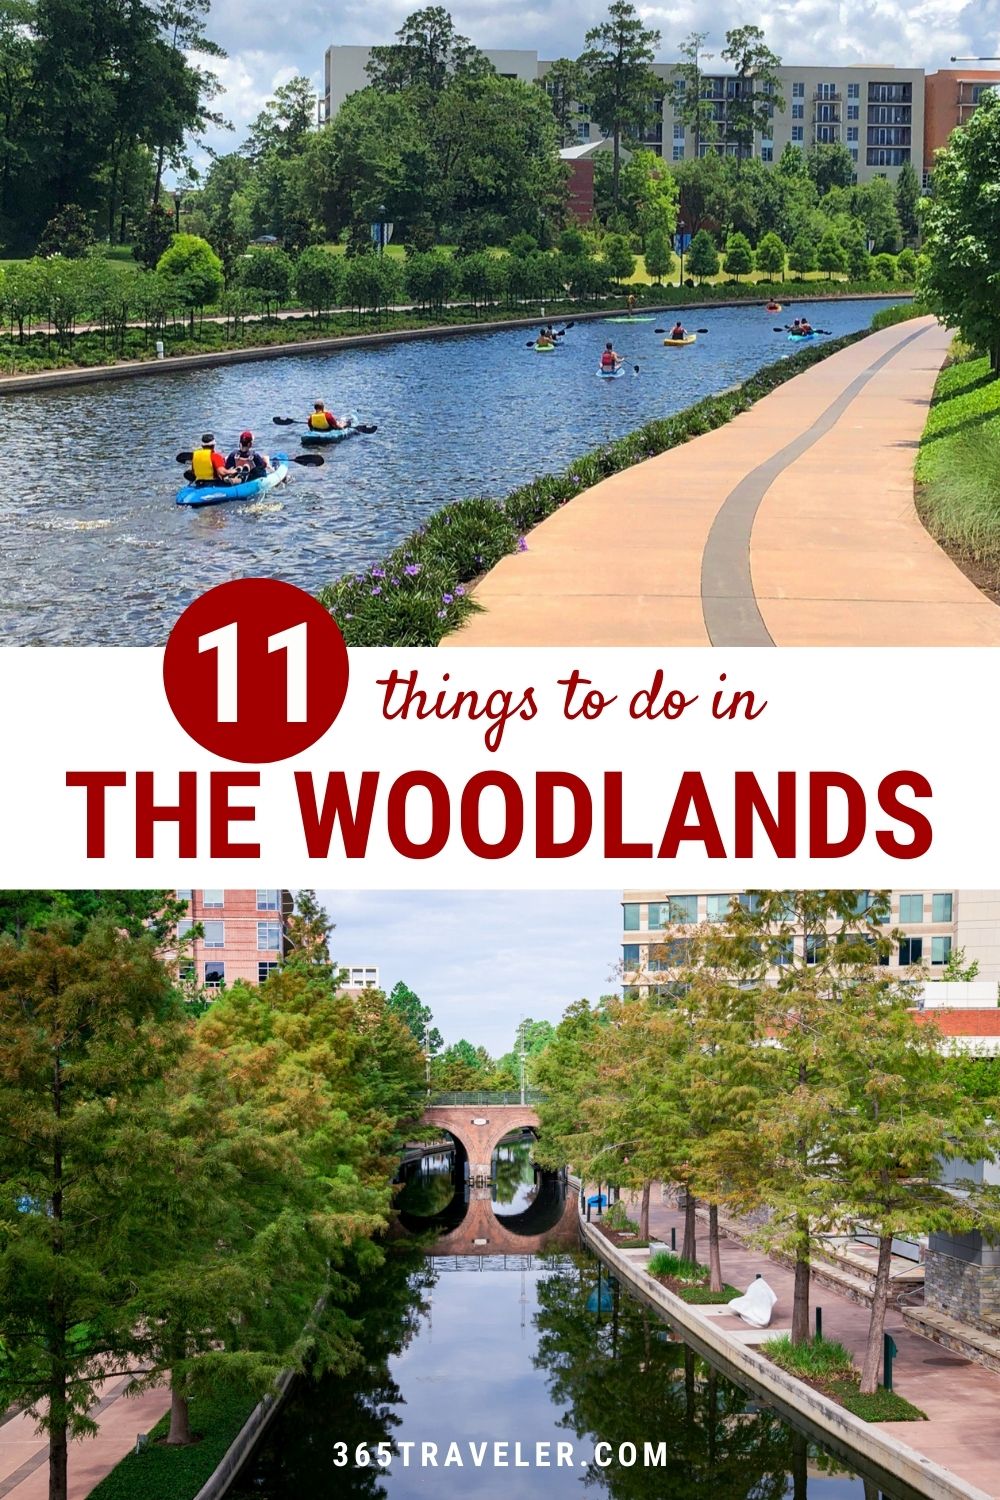 11 Awesome Things To Do in the Woodlands, Texas